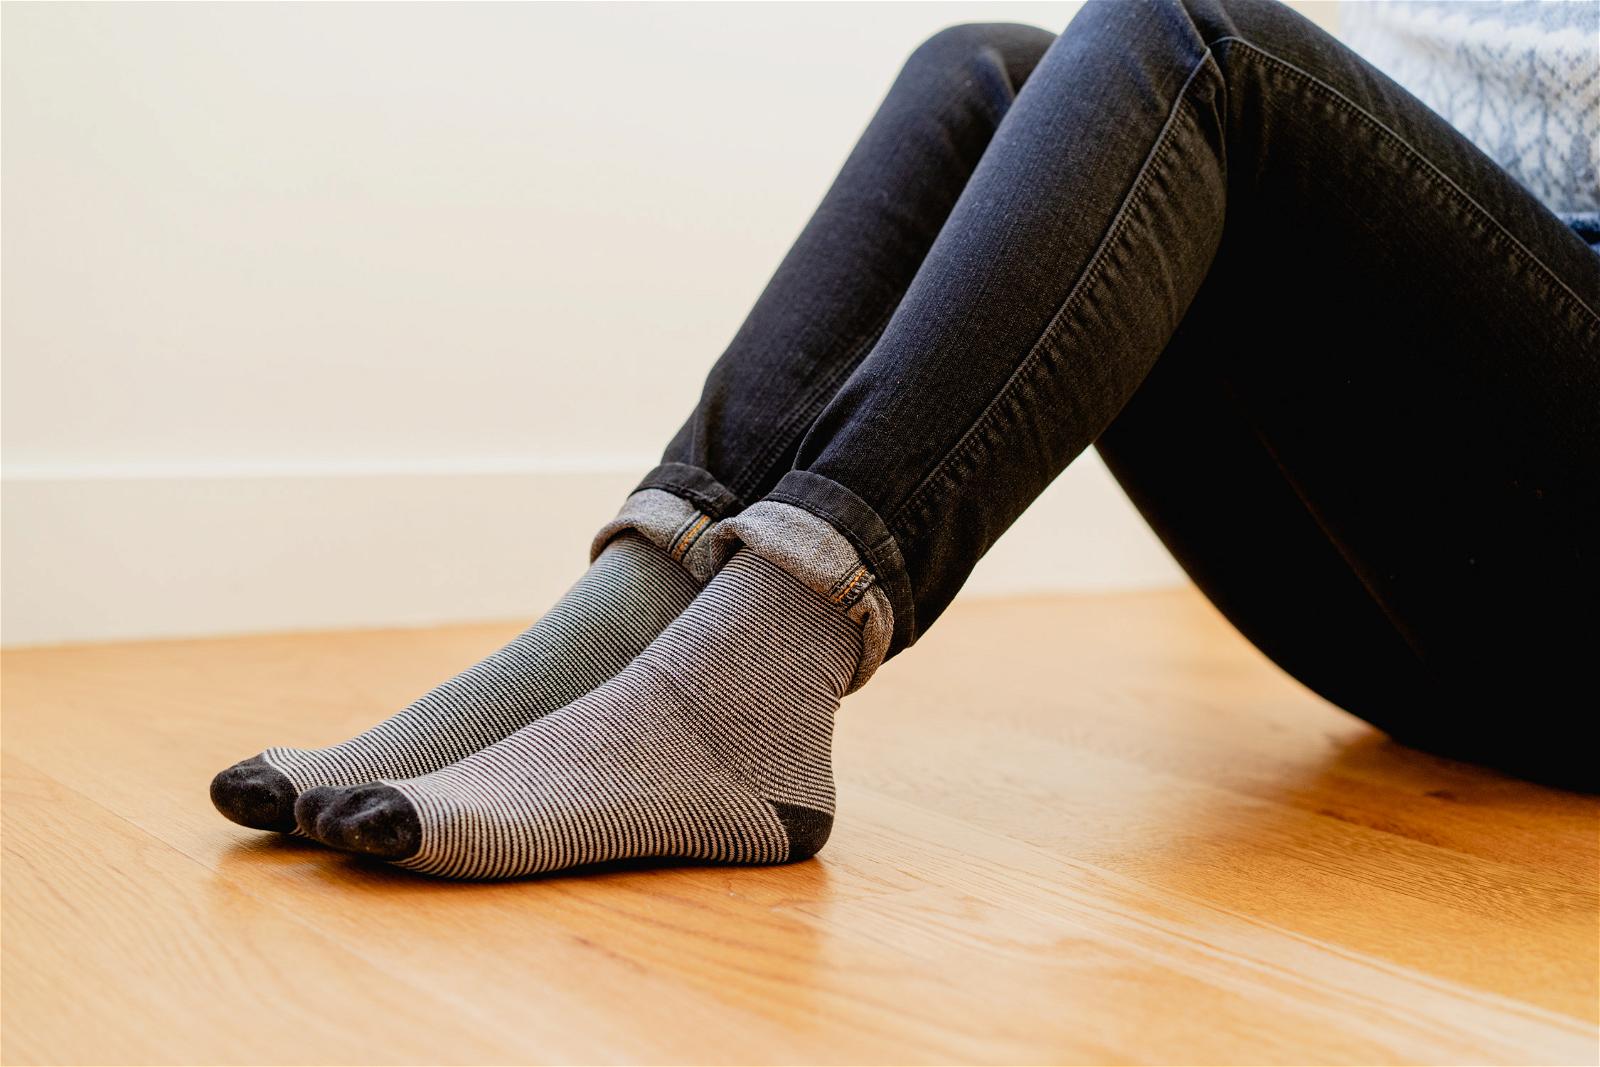 22 Best Travel Socks (Compression, Quick-Drying, All-Weather)